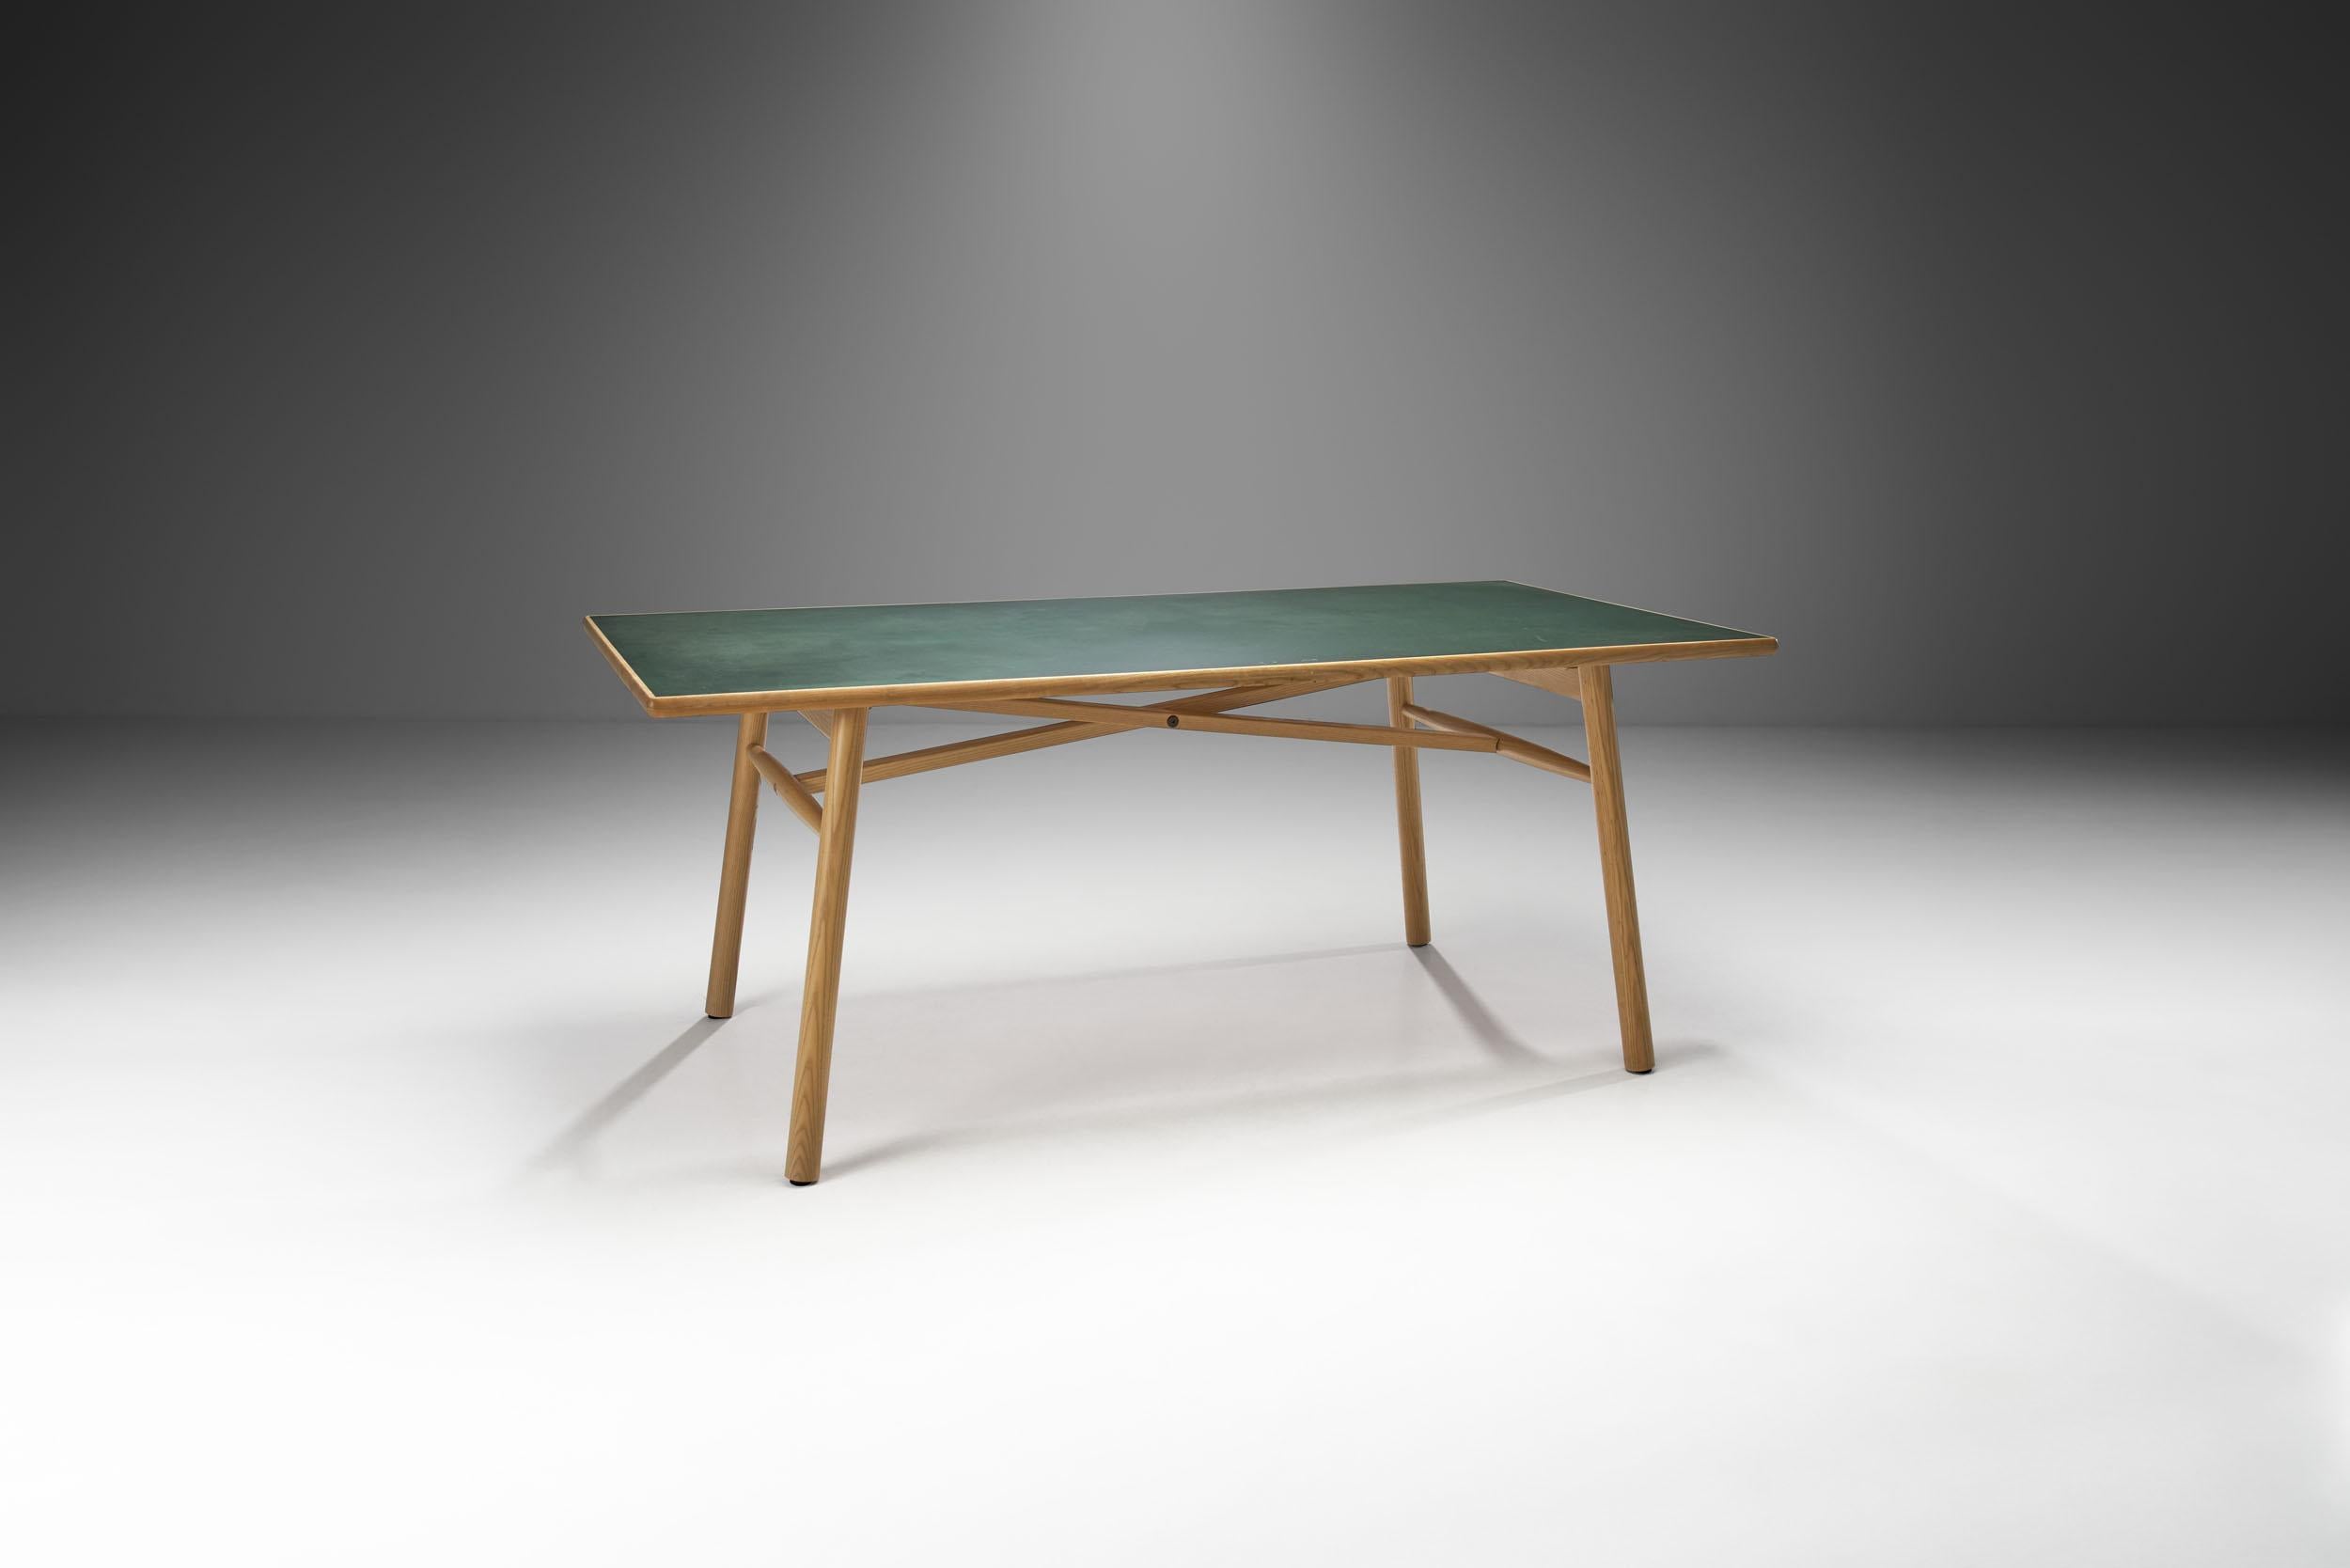 The “C35 FDB” table series was designed by Poul M. Volther in 1957 for Danish Furniture co-operative FDB. The company, FDB Møbler was founded in 1942 with architect, Børge Mogensen heading the studio. According to their philosophy, every new piece